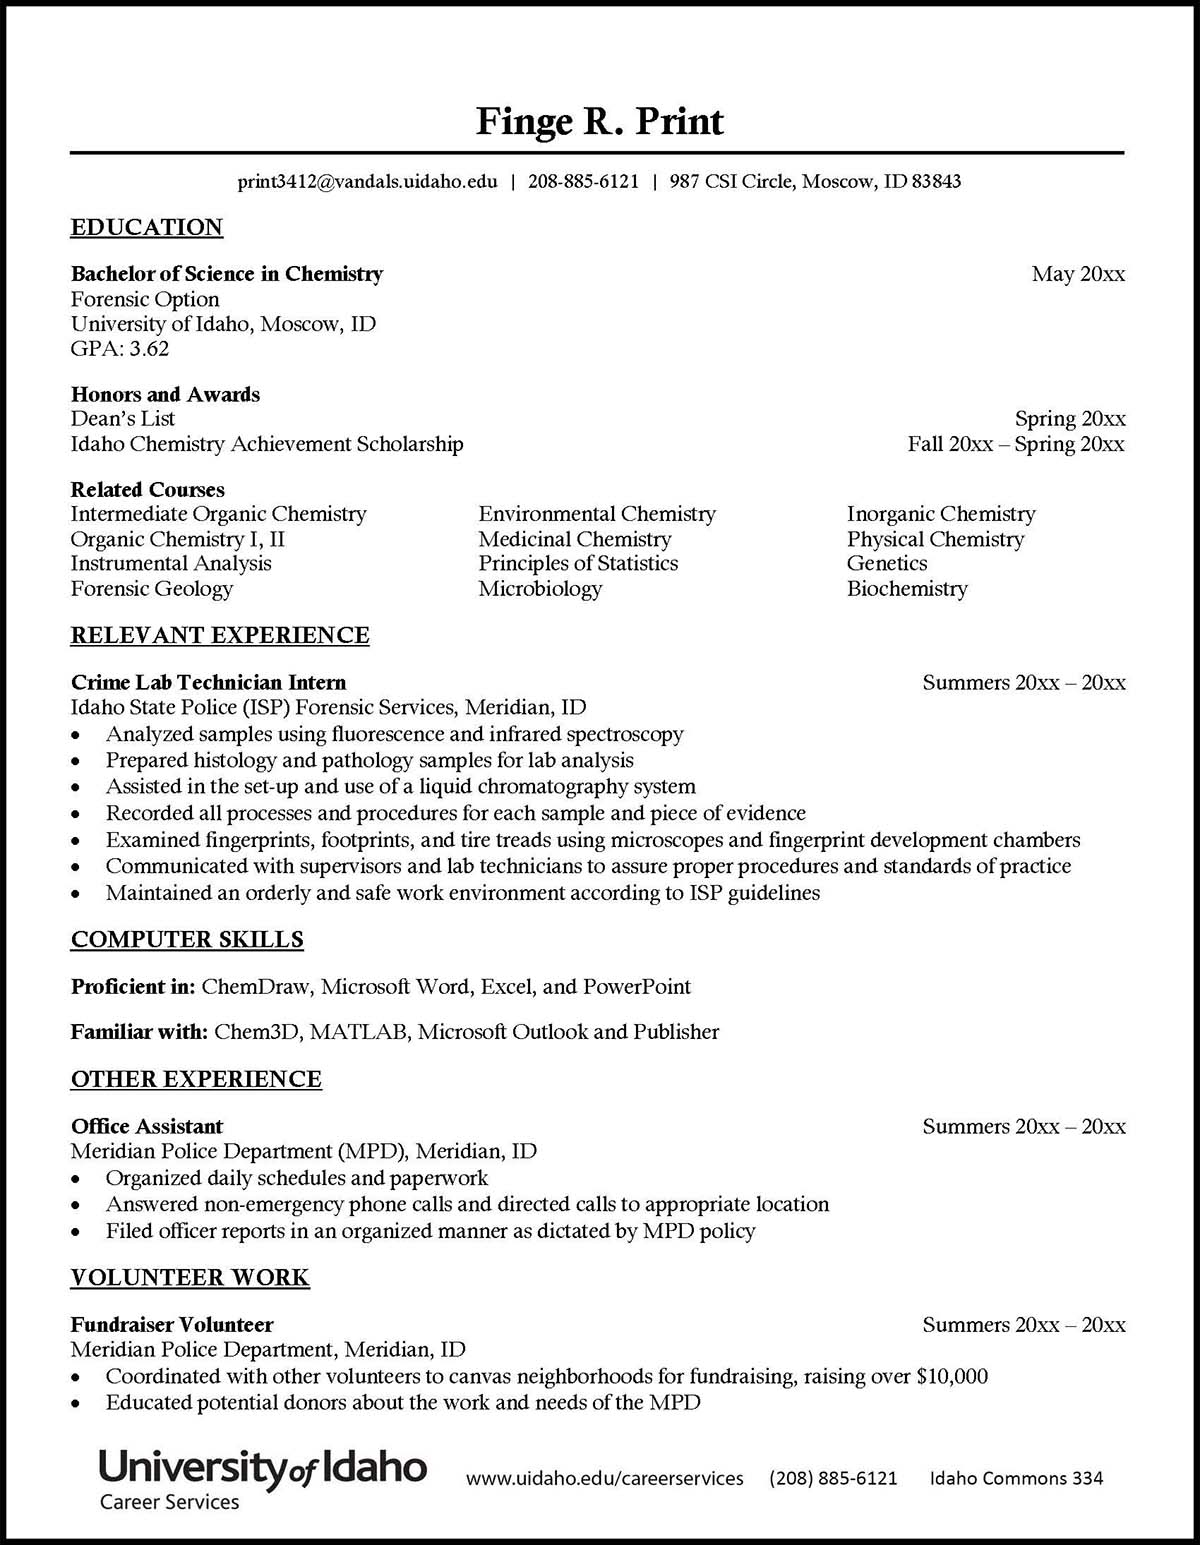 Cover Letters - Career Services - University of Idaho